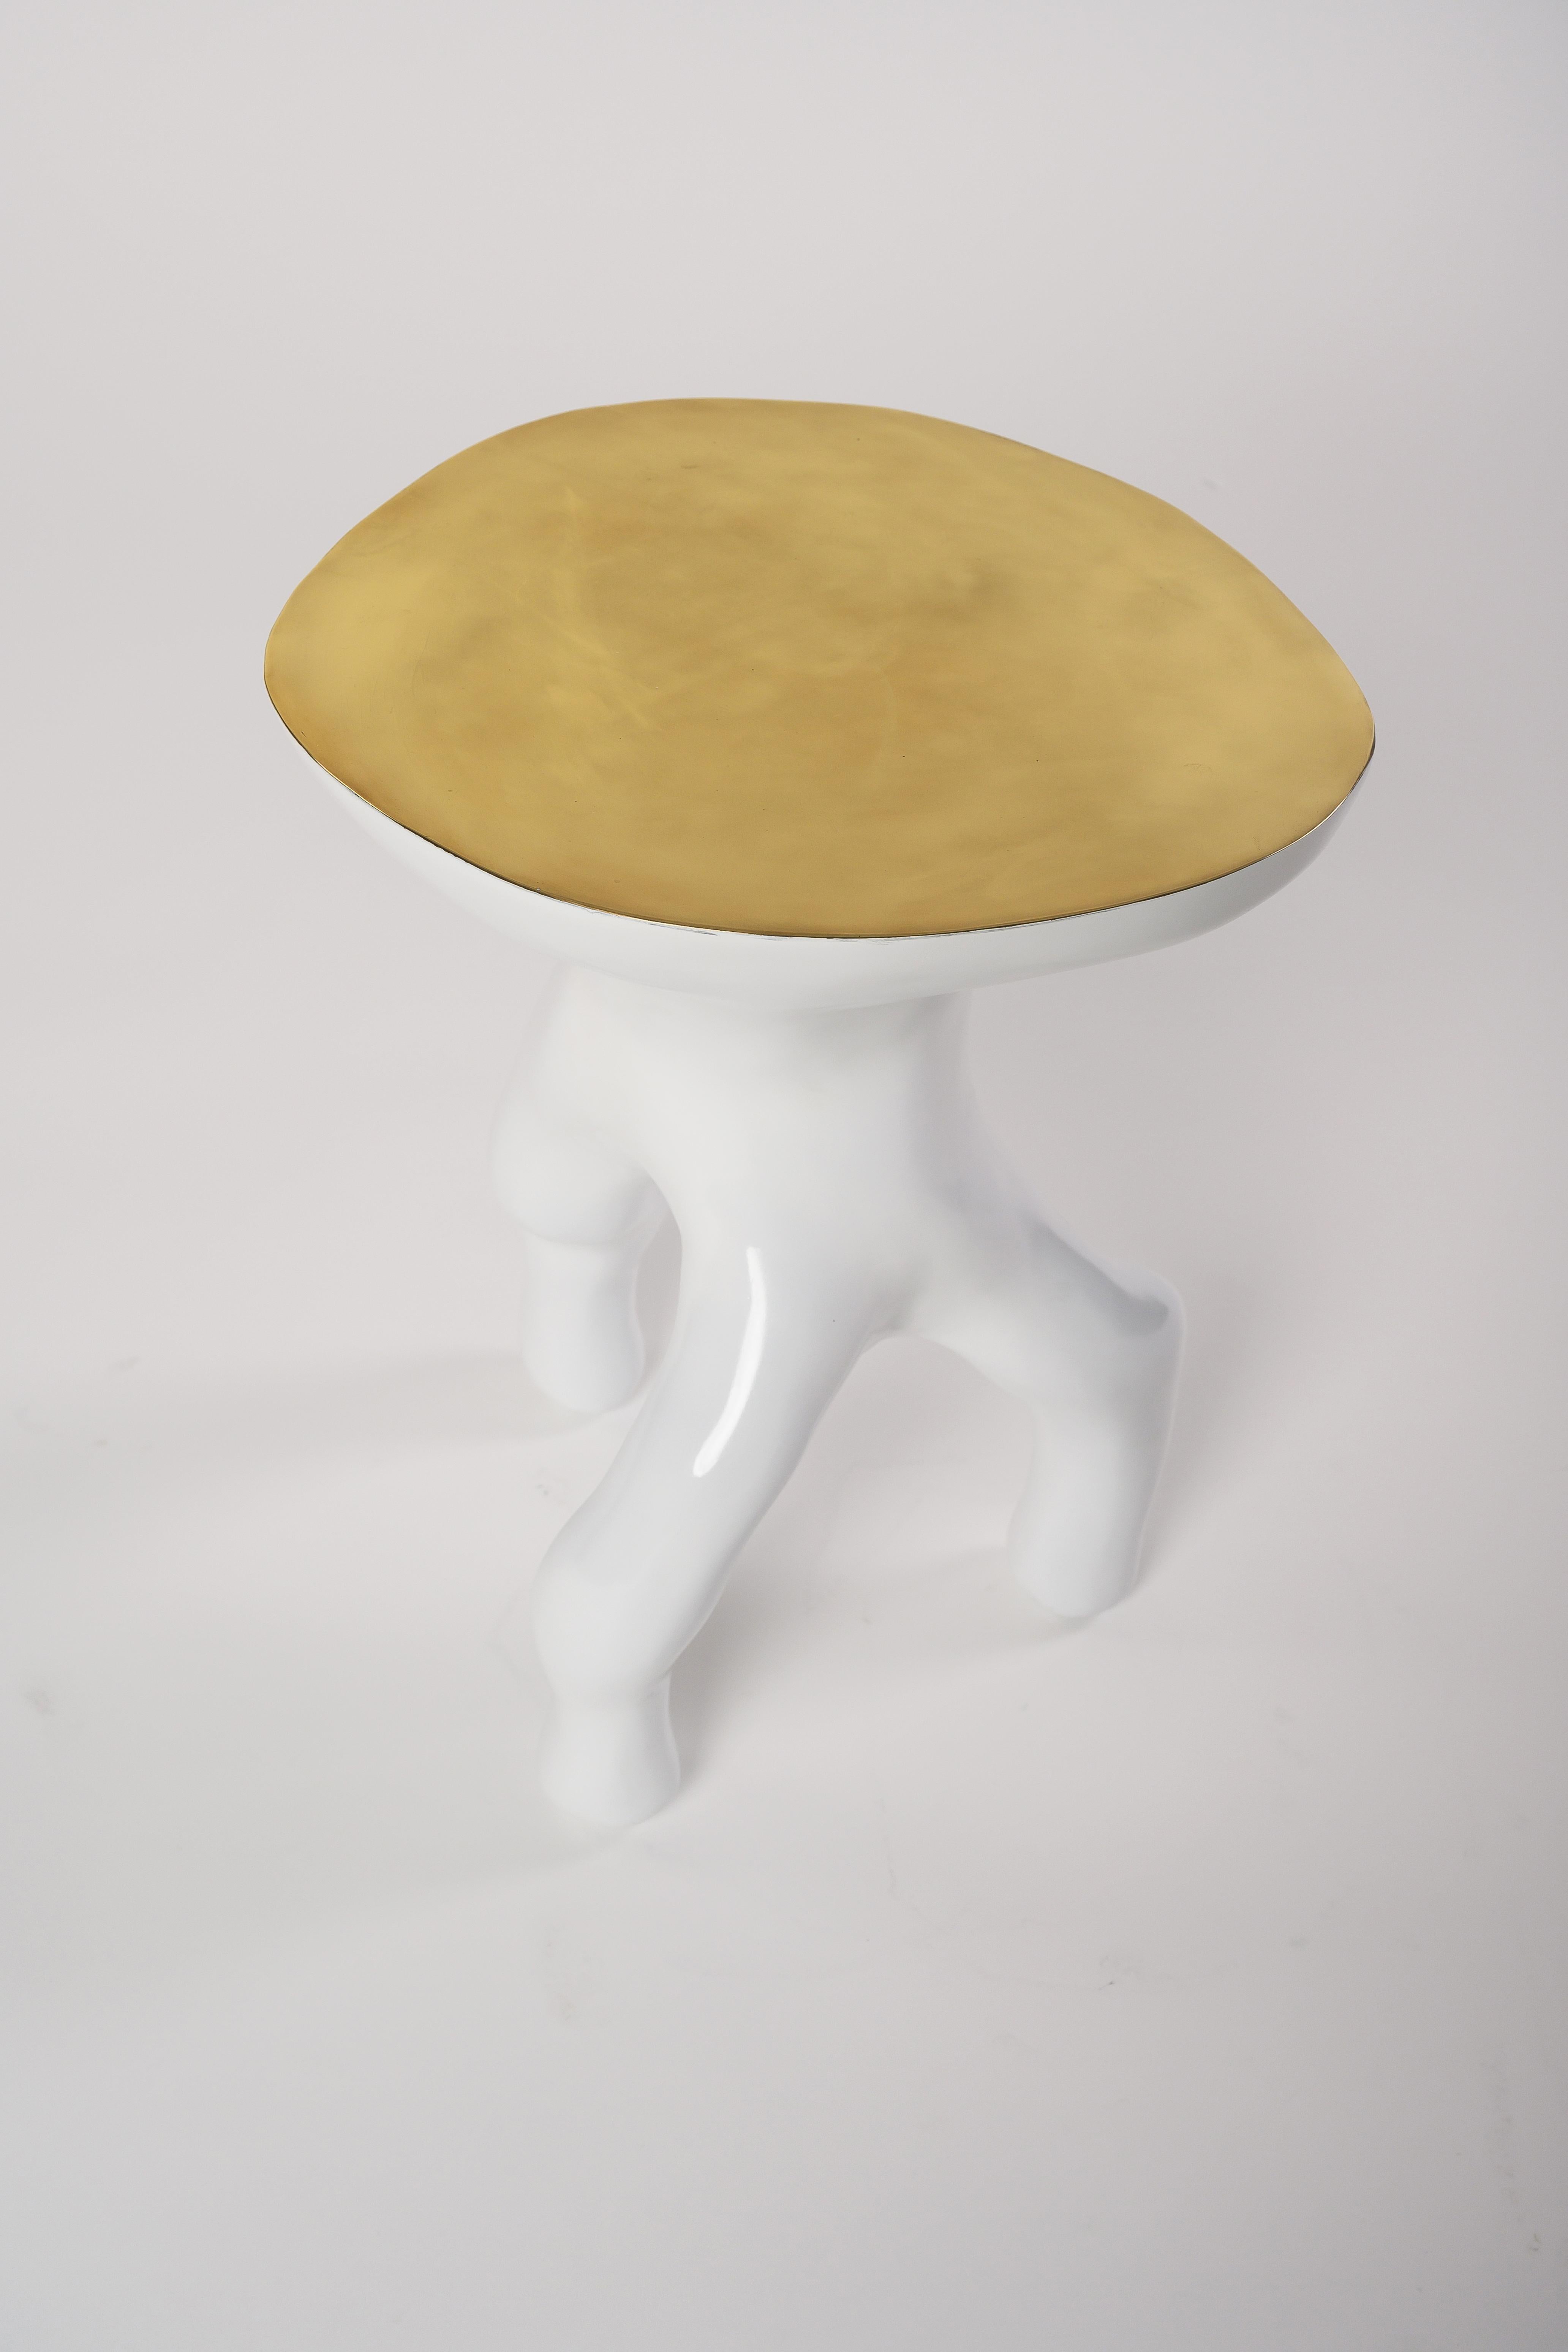 Modern White and Gold Sculptural Luca Side Table / Stool by Elan Atelier (Preorder) For Sale